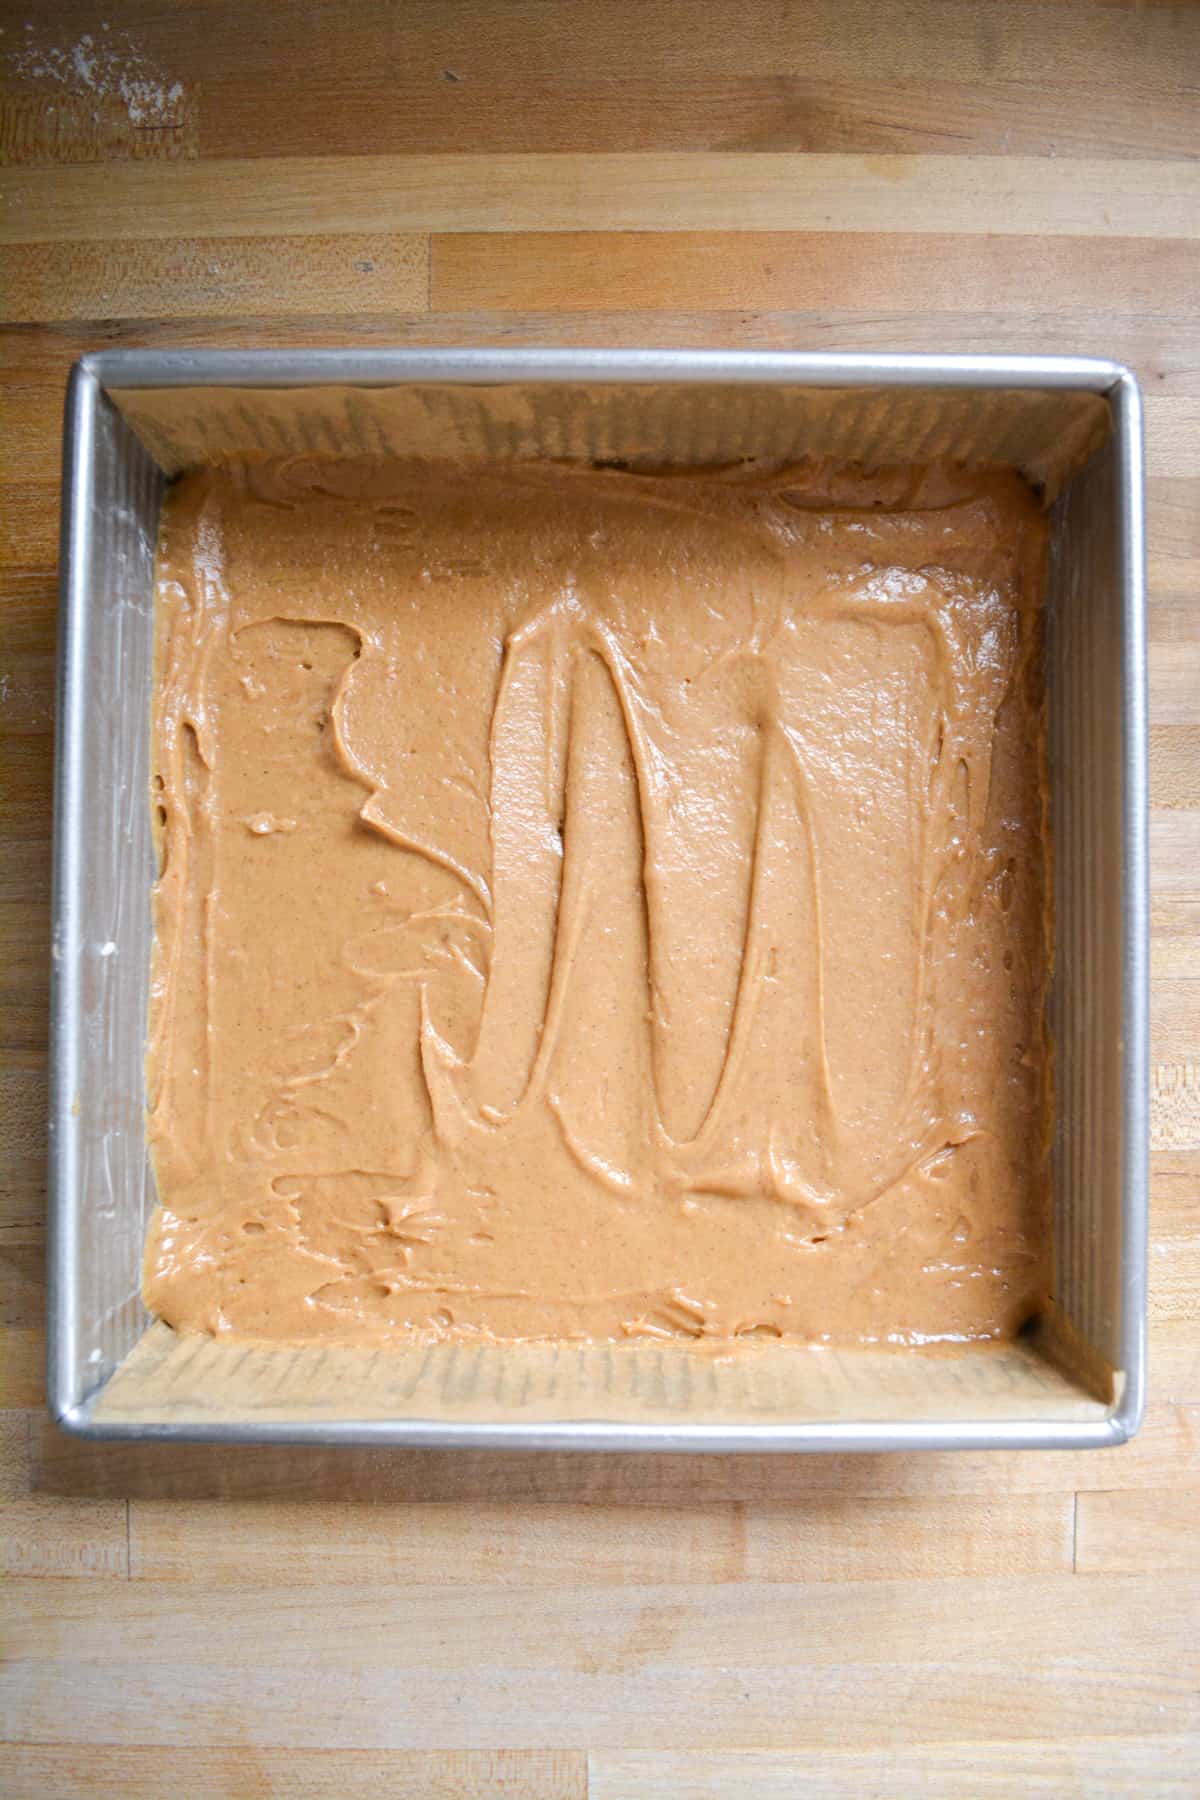 Cake batter spread out in a square pan.